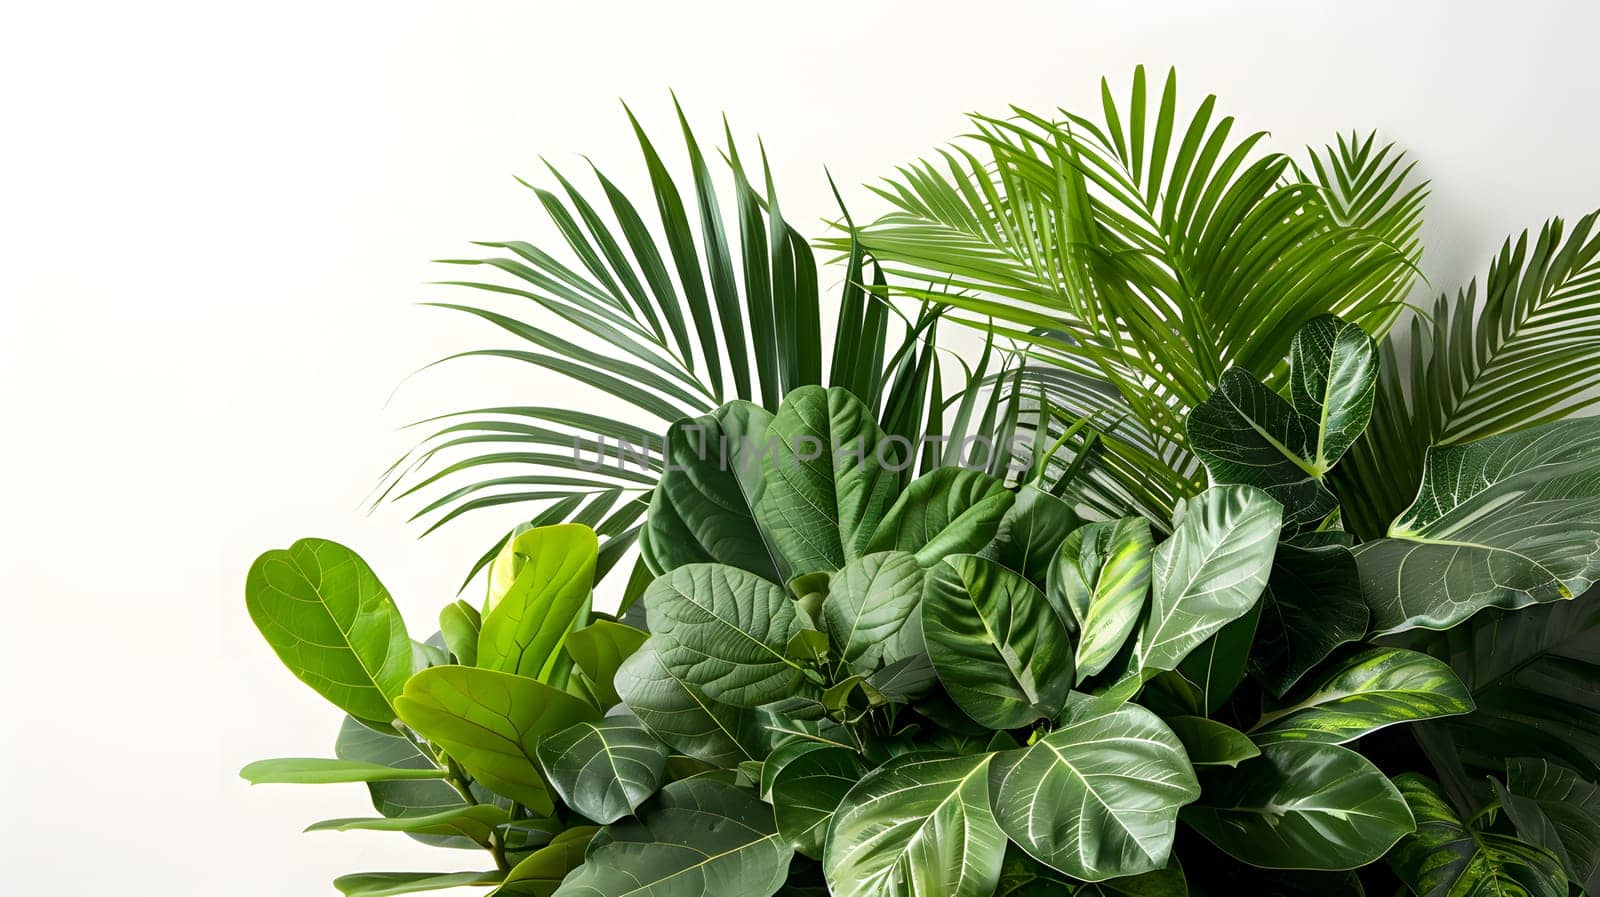 A lush arrangement of green tropical leaves, including palms and other terrestrial plants, set against a clean white background, creating a serene and fresh landscape